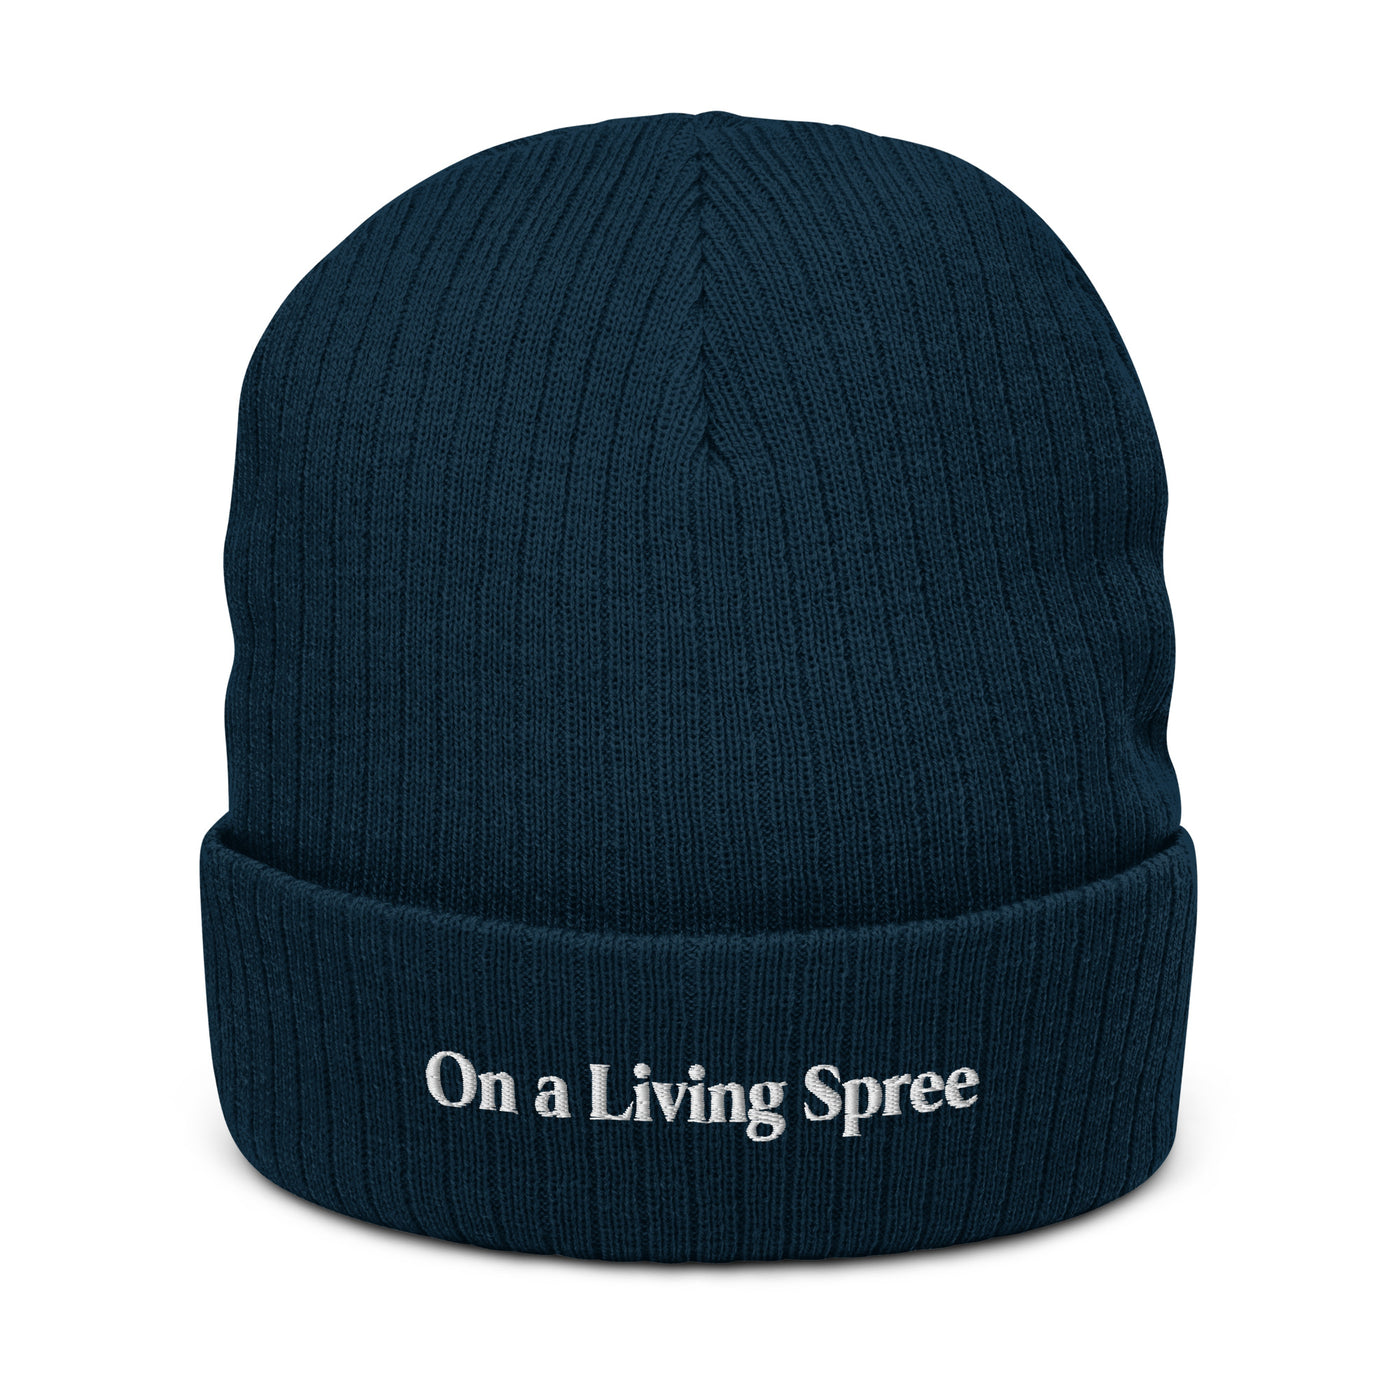 On a Living Spree Recycled Cuffed Beanie